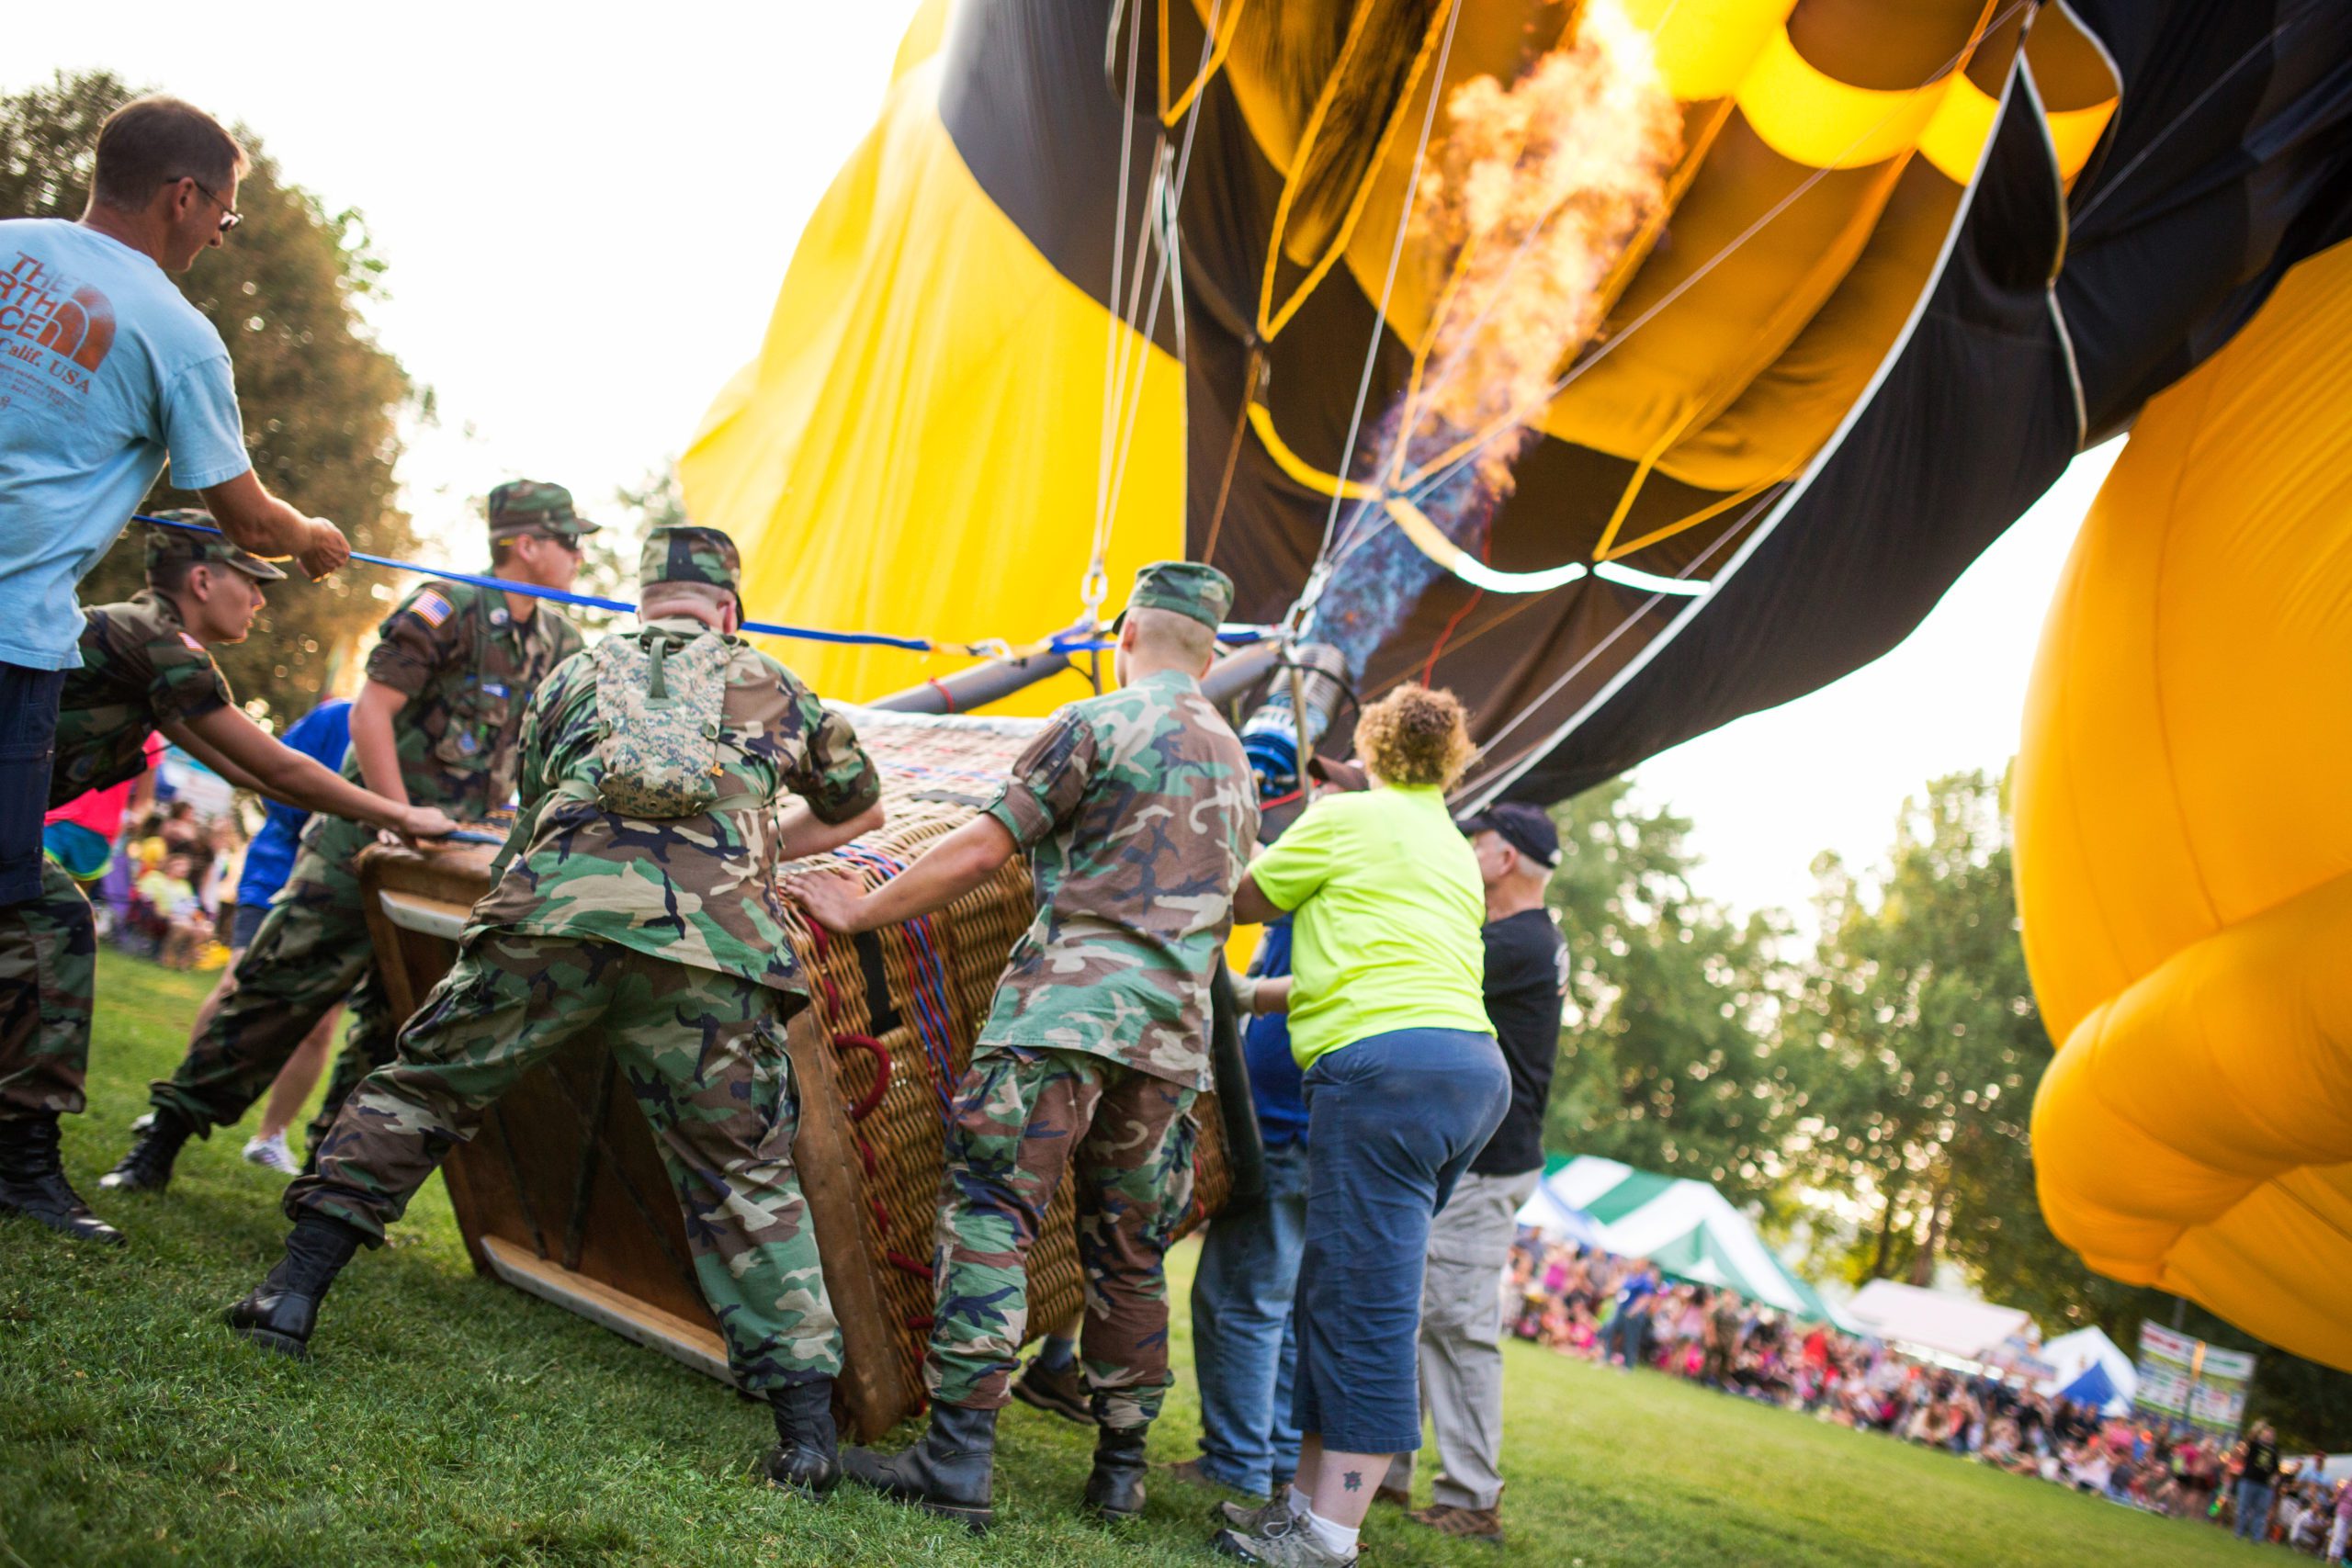 Military heating up hot air balloon  at outdoor festival